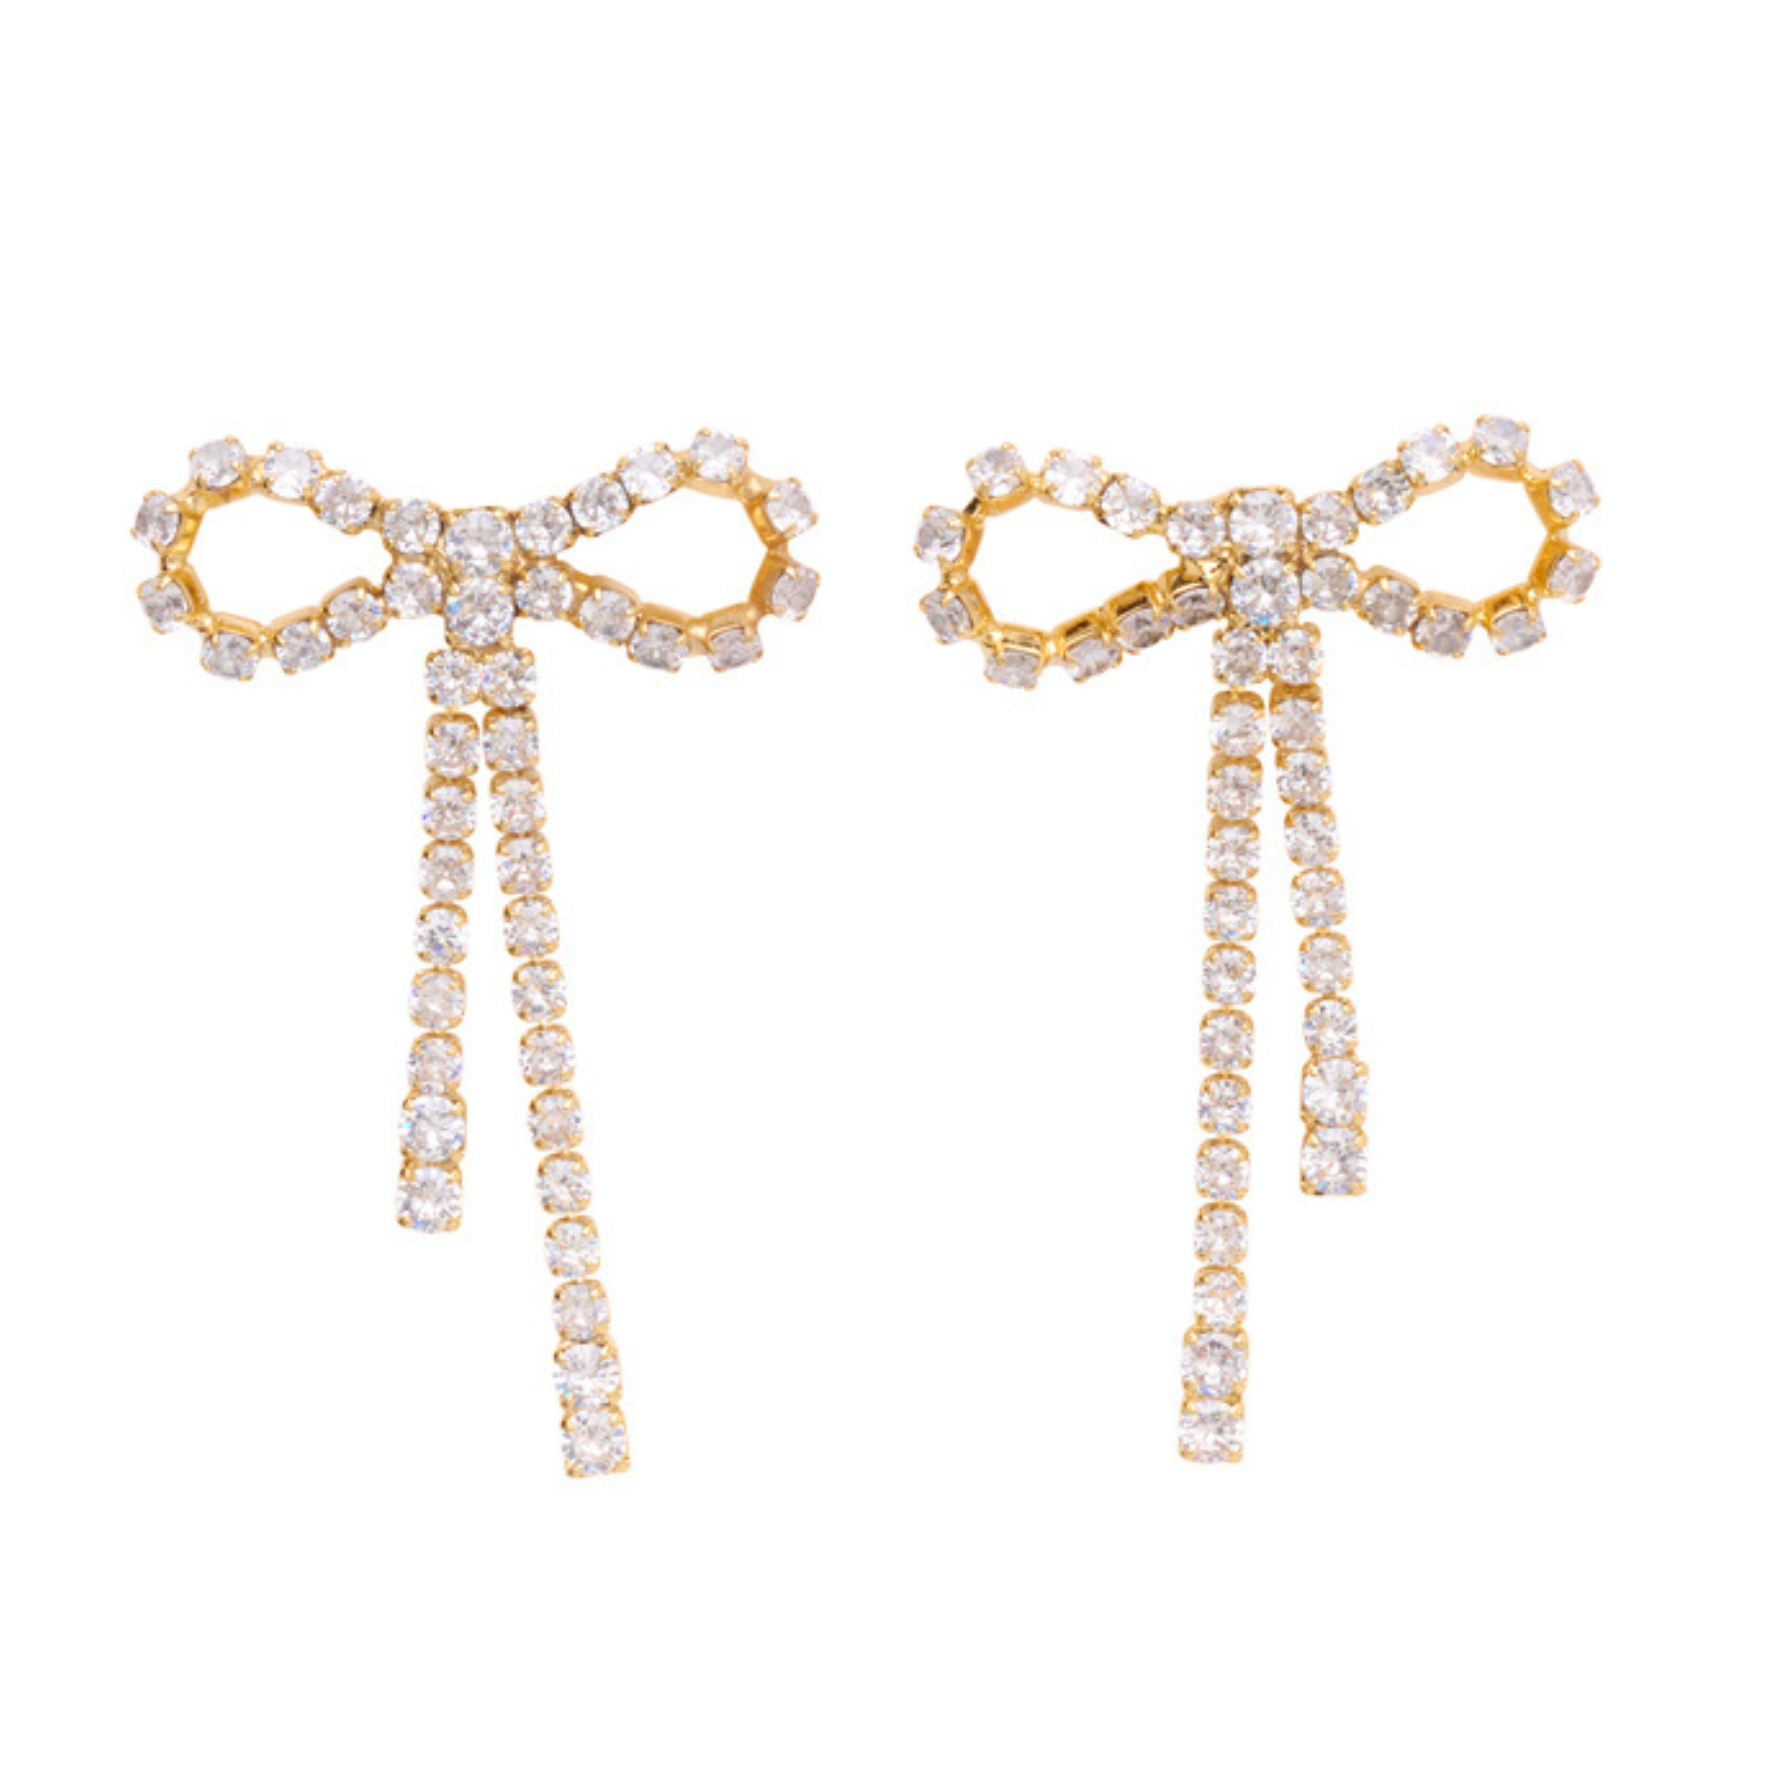 Arco Large Crystal Earrings fra Pico i Forgyldt Messing